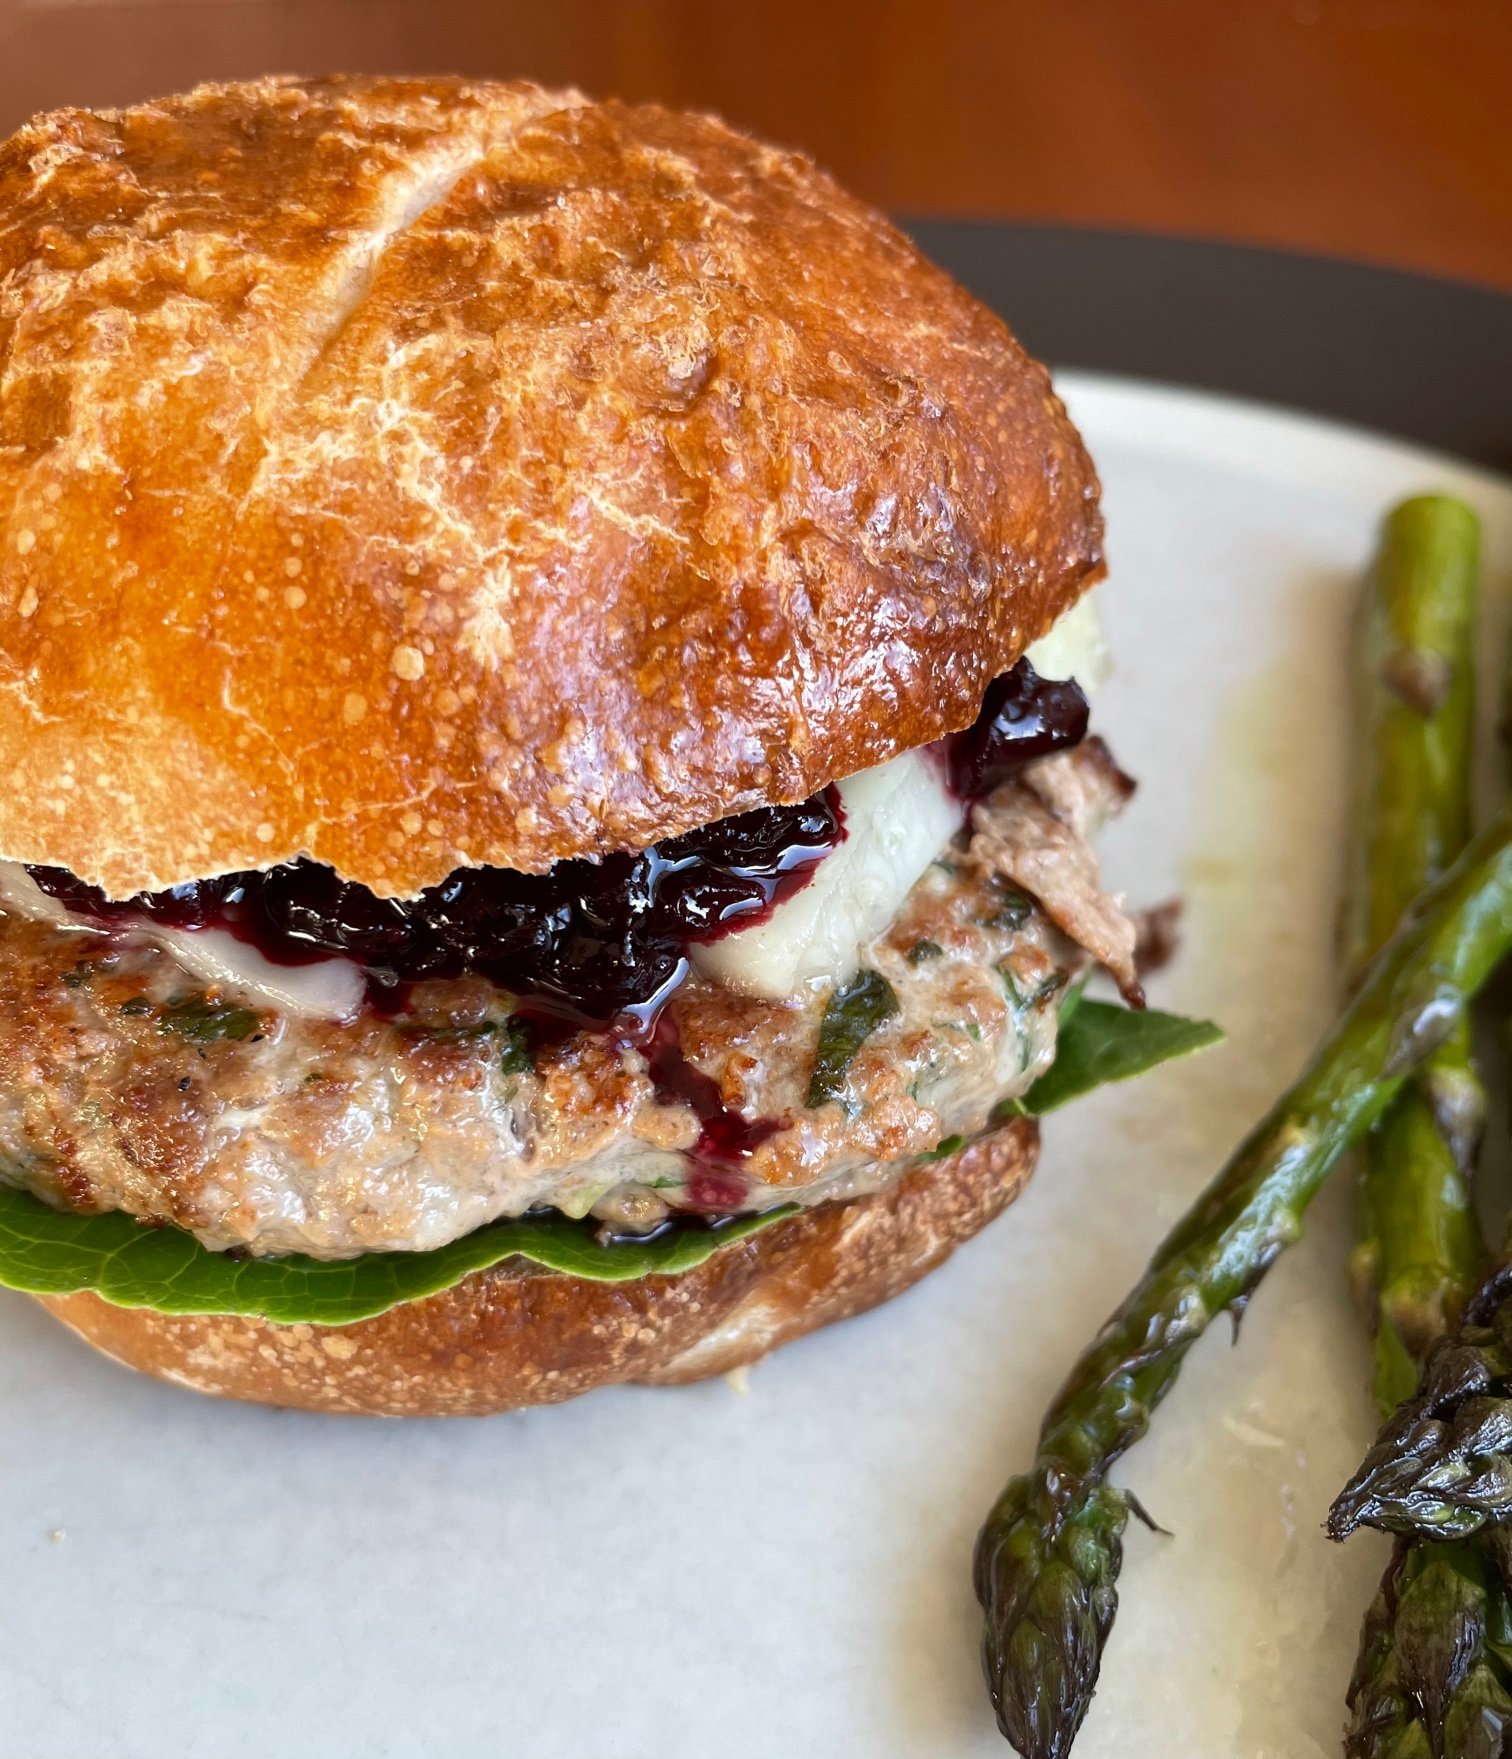 a duck burger on pretzel bun with lettuce, cheese, and cherry ketchup, on a plate with asparagus